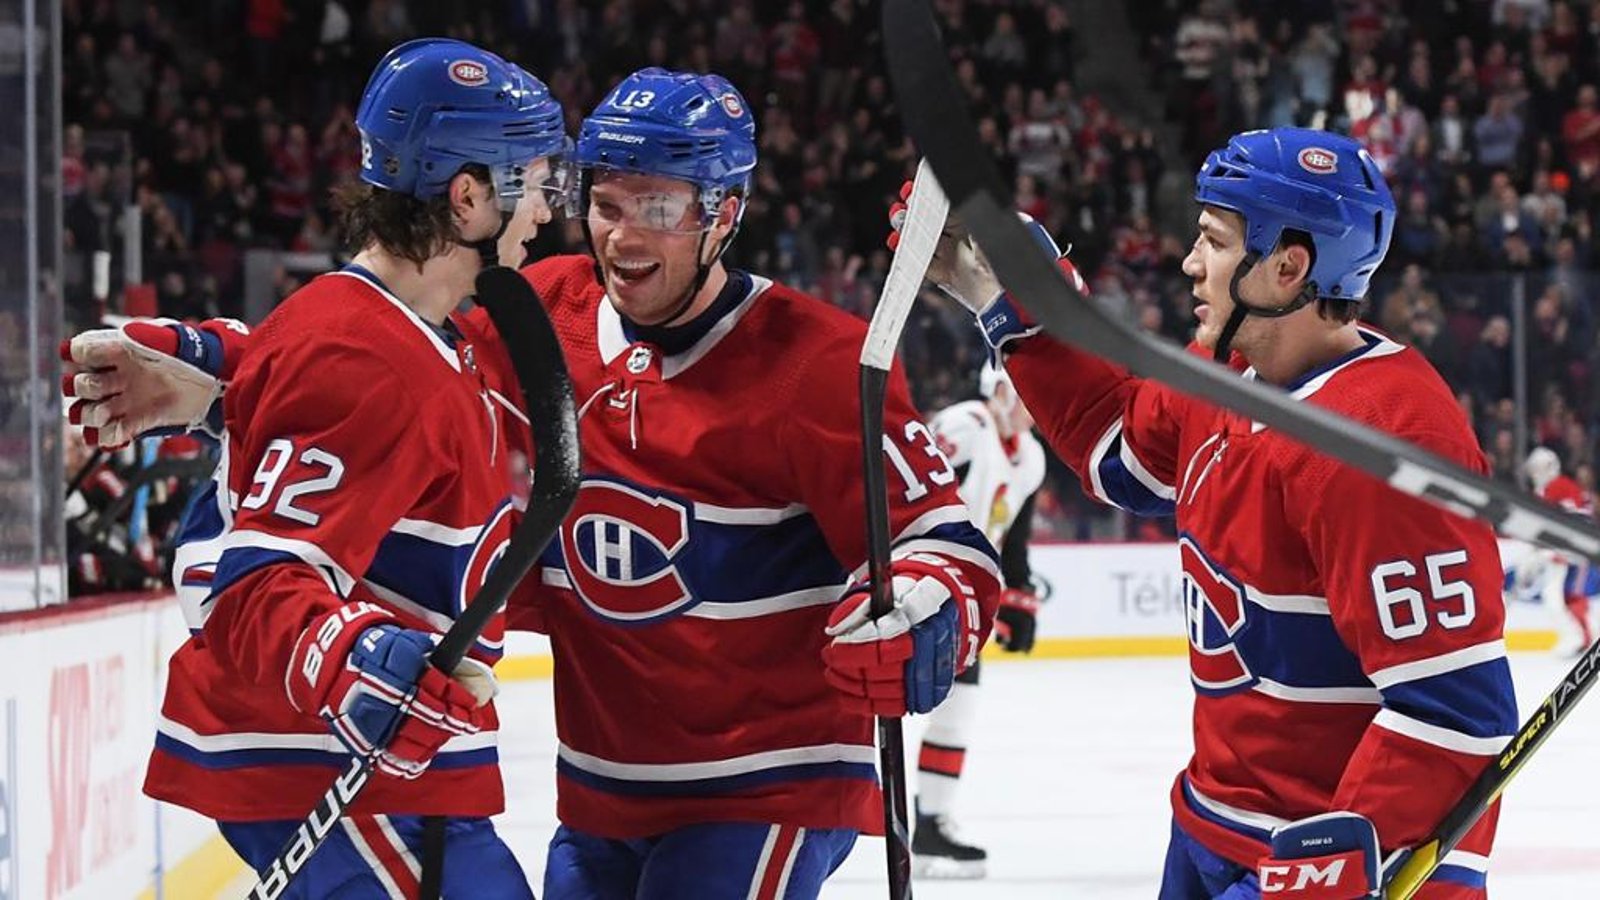 Habs’ star forward is getting driven out of town by fans; will get traded soon! 